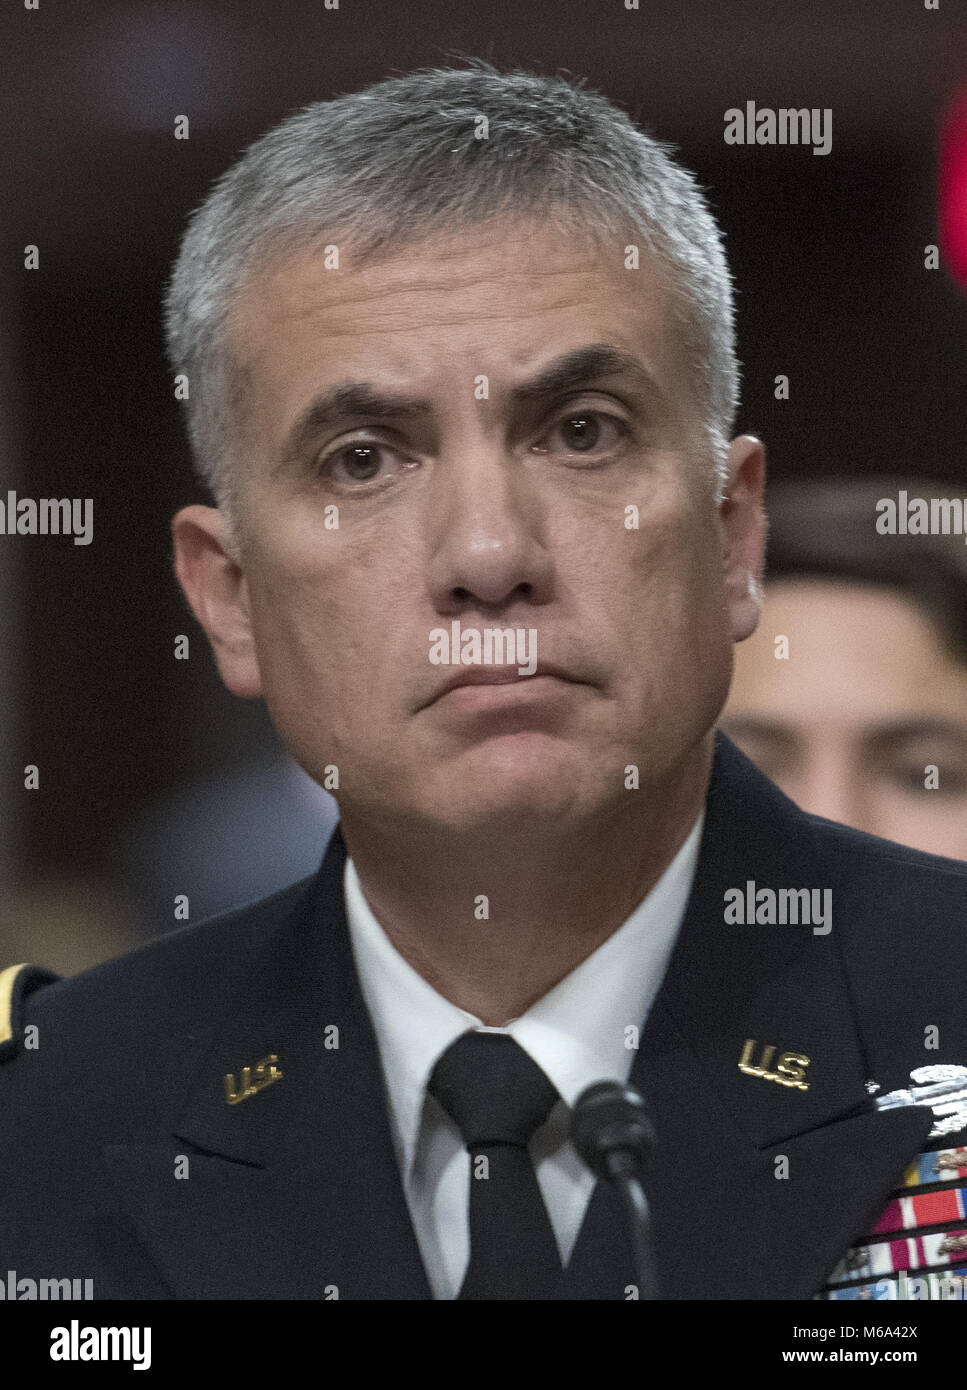 Washington, District of Columbia, USA. 1st Mar, 2018. Lieutenant General Paul M. Nakasone, United States Army, testifies before the US Senate Committee on Armed Services on his nomination to be General And Director, National Security Agency/Chief, Central Security Service/Commander, United States Cyber Command on Capitol Hill in Washington, DC on Thursday, March 1, 2018. If confirmed, Nakasone will replace US Navy Admiral Mike Rogers, who will be retiring.Credit: Ron Sachs/CNP Credit: Ron Sachs/CNP/ZUMA Wire/Alamy Live News Stock Photo